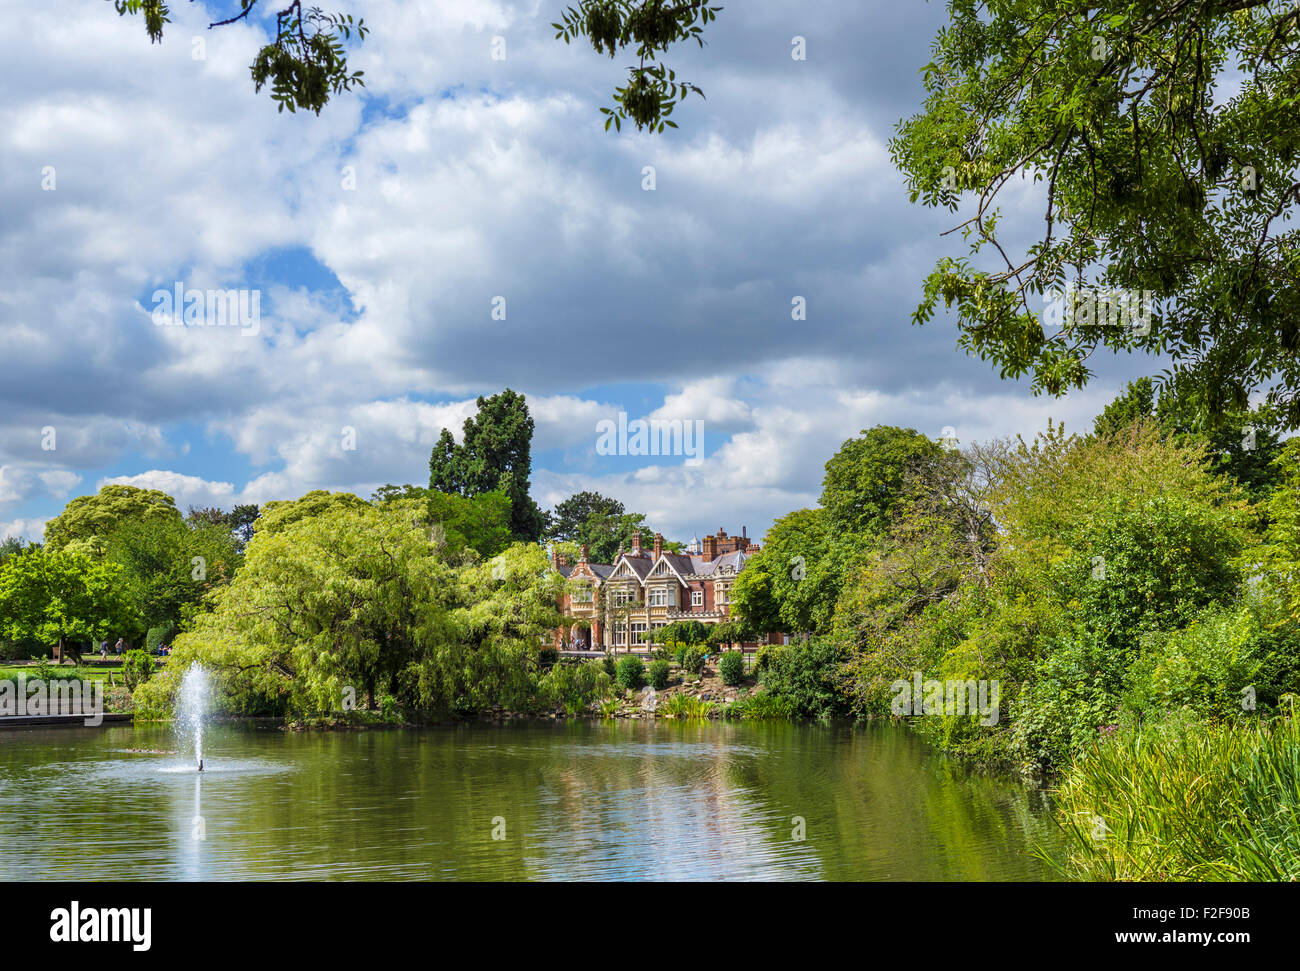 The lake and mansion house at Bletchley Park, Buckinghamshire, England, UK Stock Photo